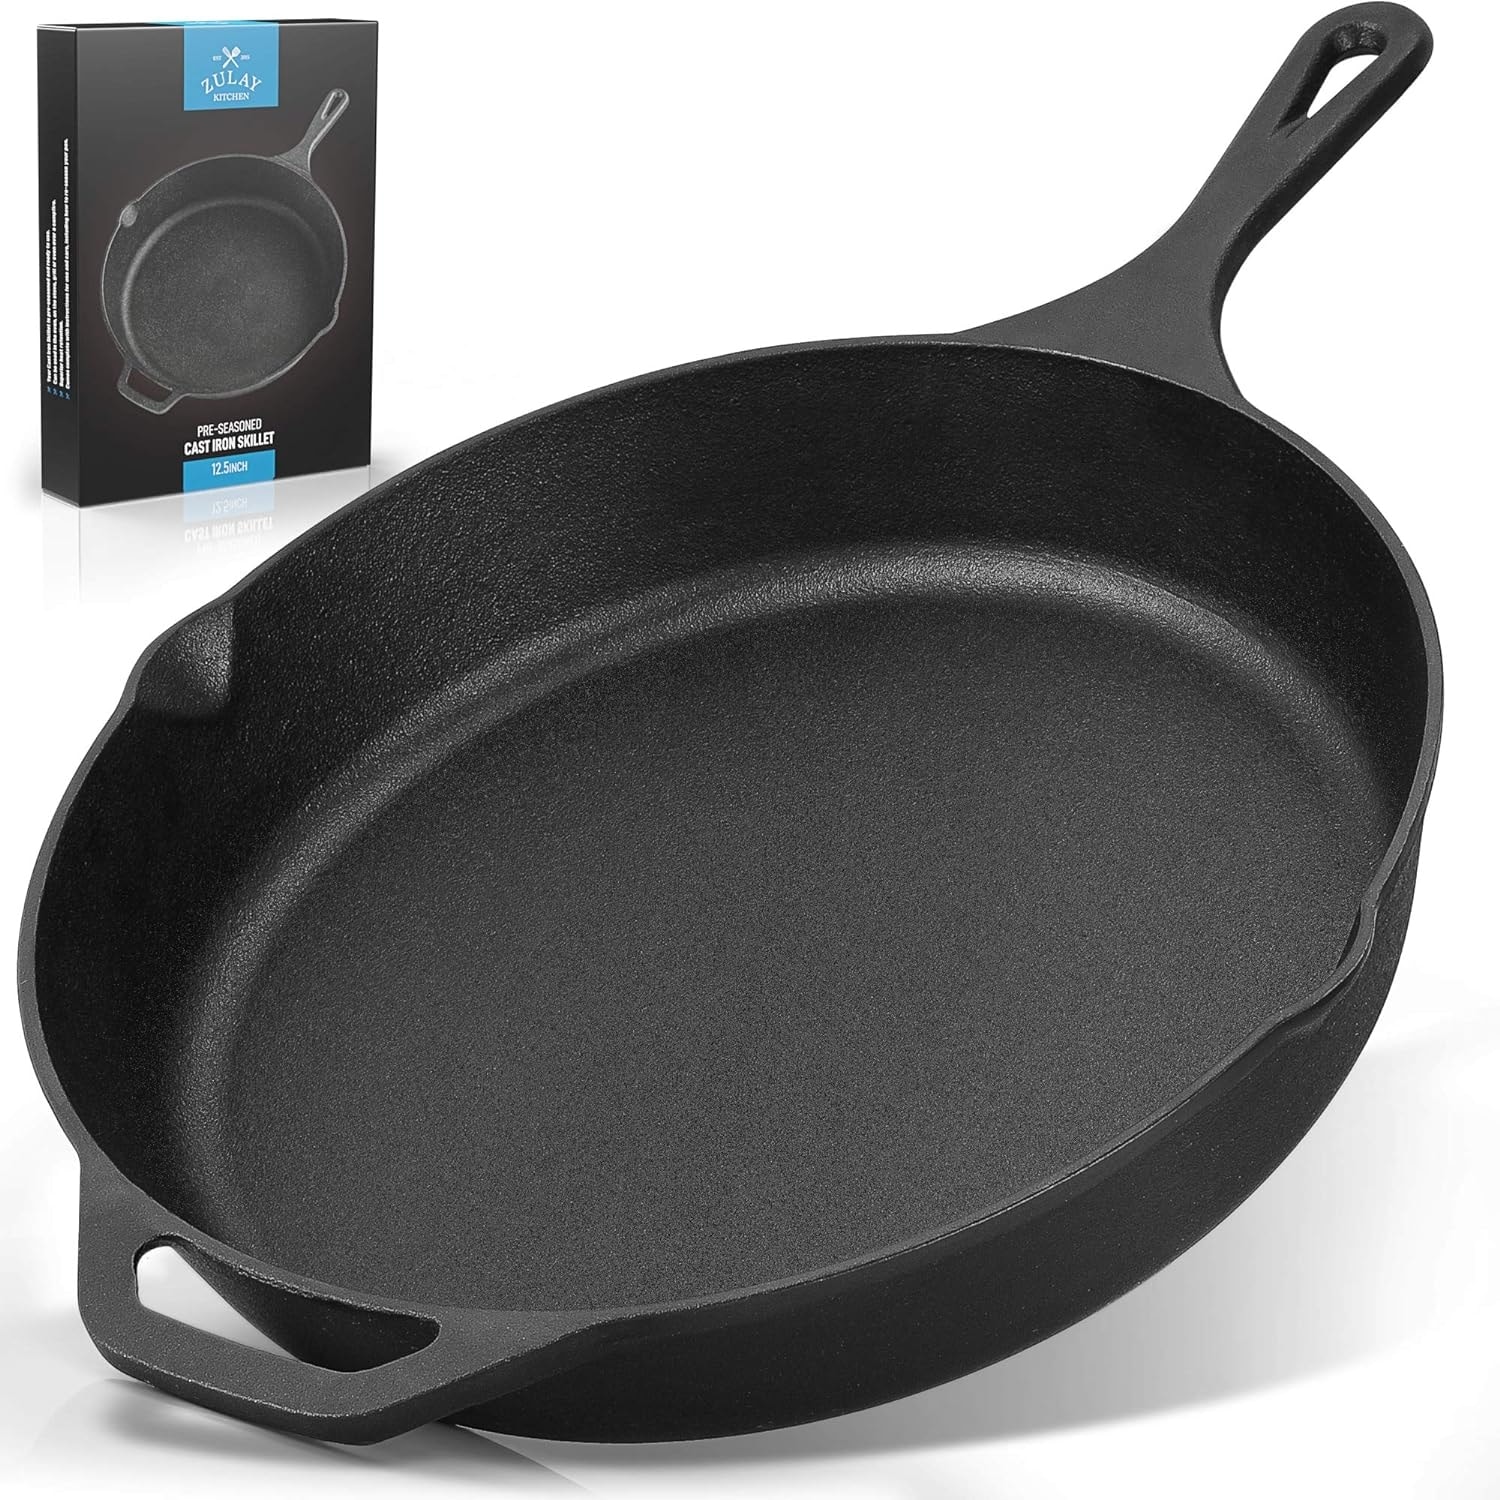 https://ak1.ostkcdn.com/images/products/is/images/direct/36542ddd8671117a9cbfef8ca88bb4998552a659/Zulay-Kitchen-Pre-Seasoned-Cast-Iron-Skillet-12-Inch.jpg